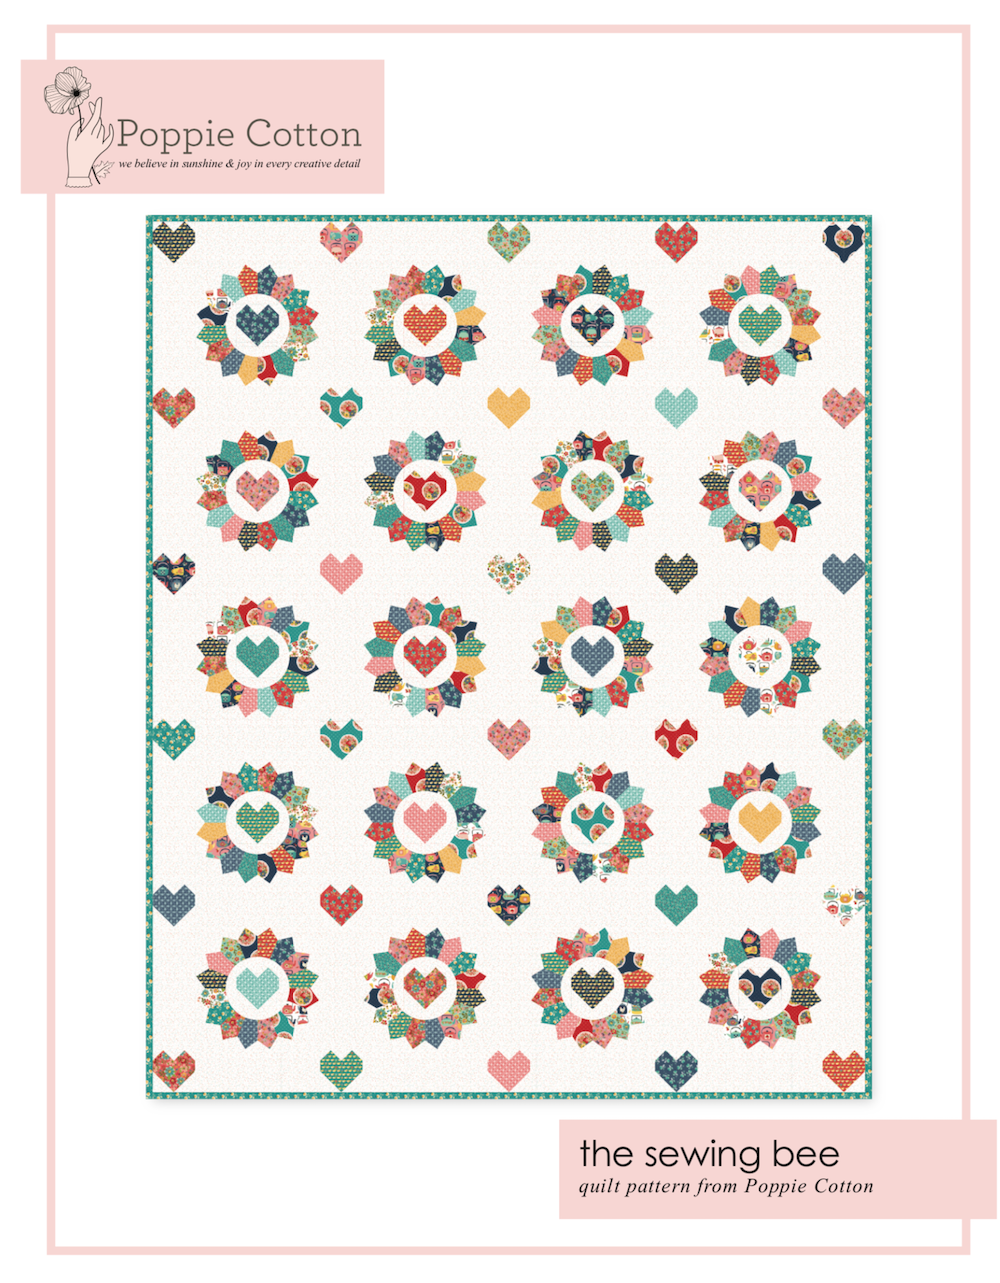 The Sewing Bee Quilt Pattern - Betsy's Sewing Kit